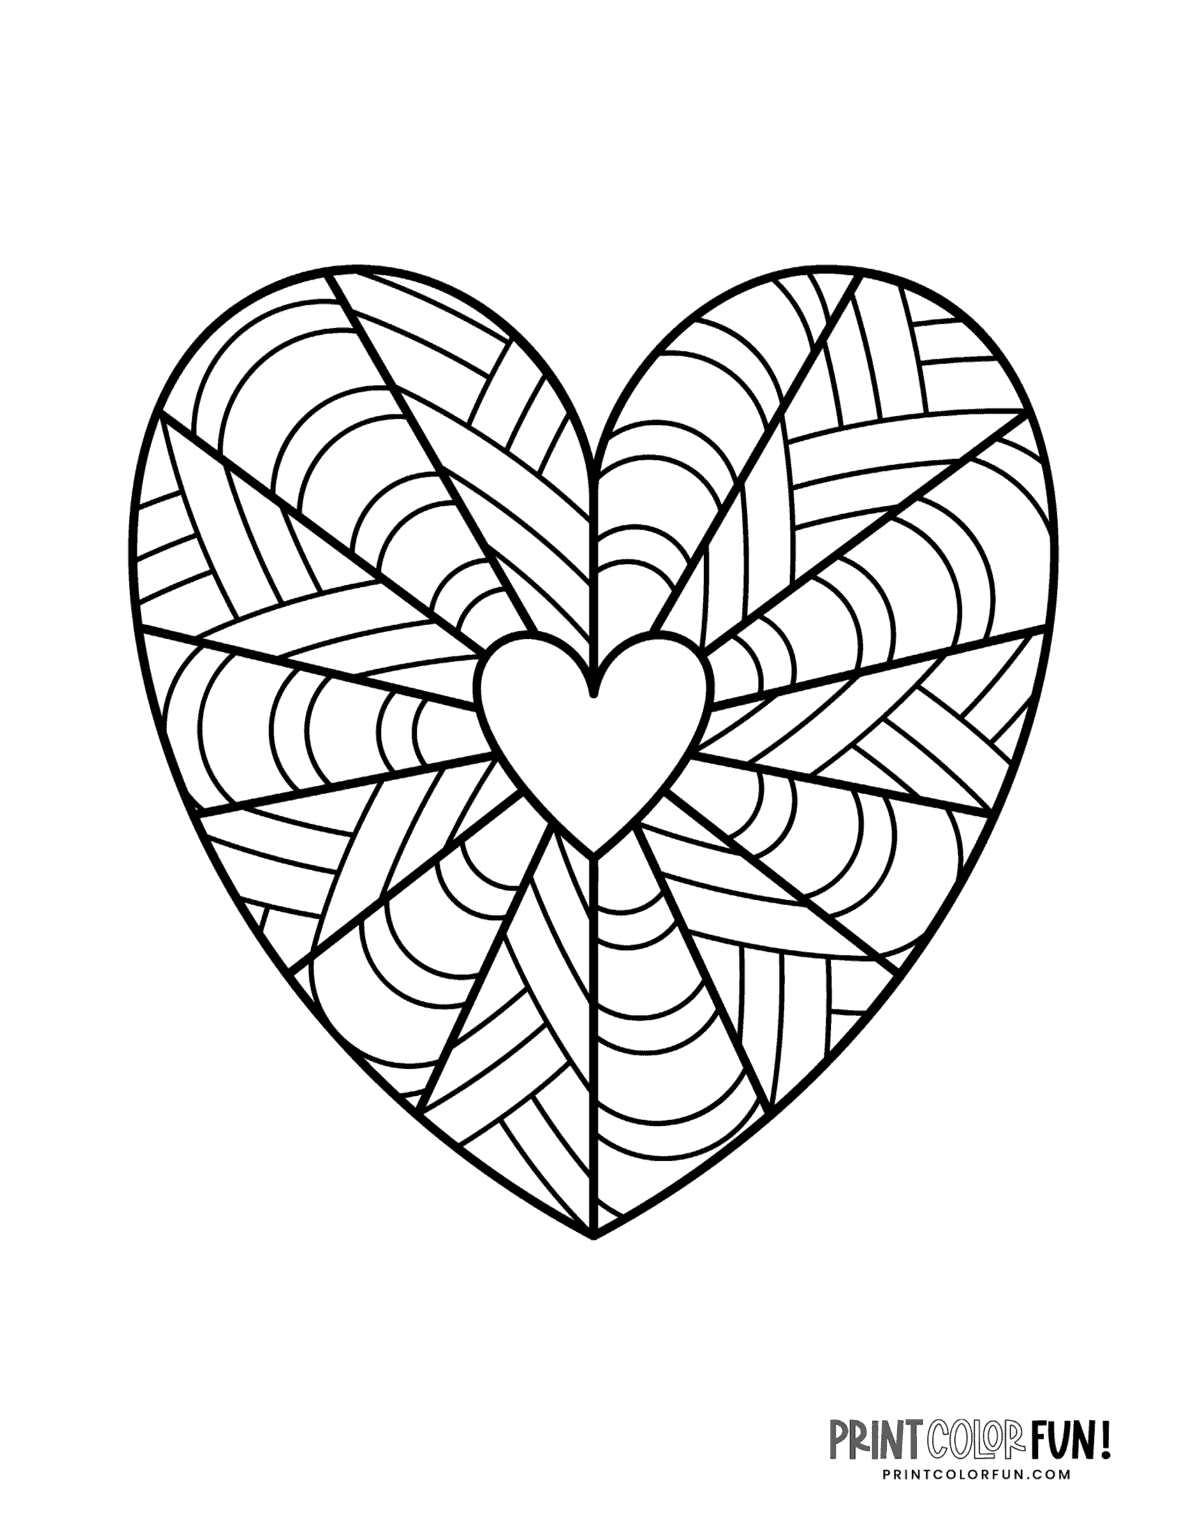 Printable Heart Pictures To Color